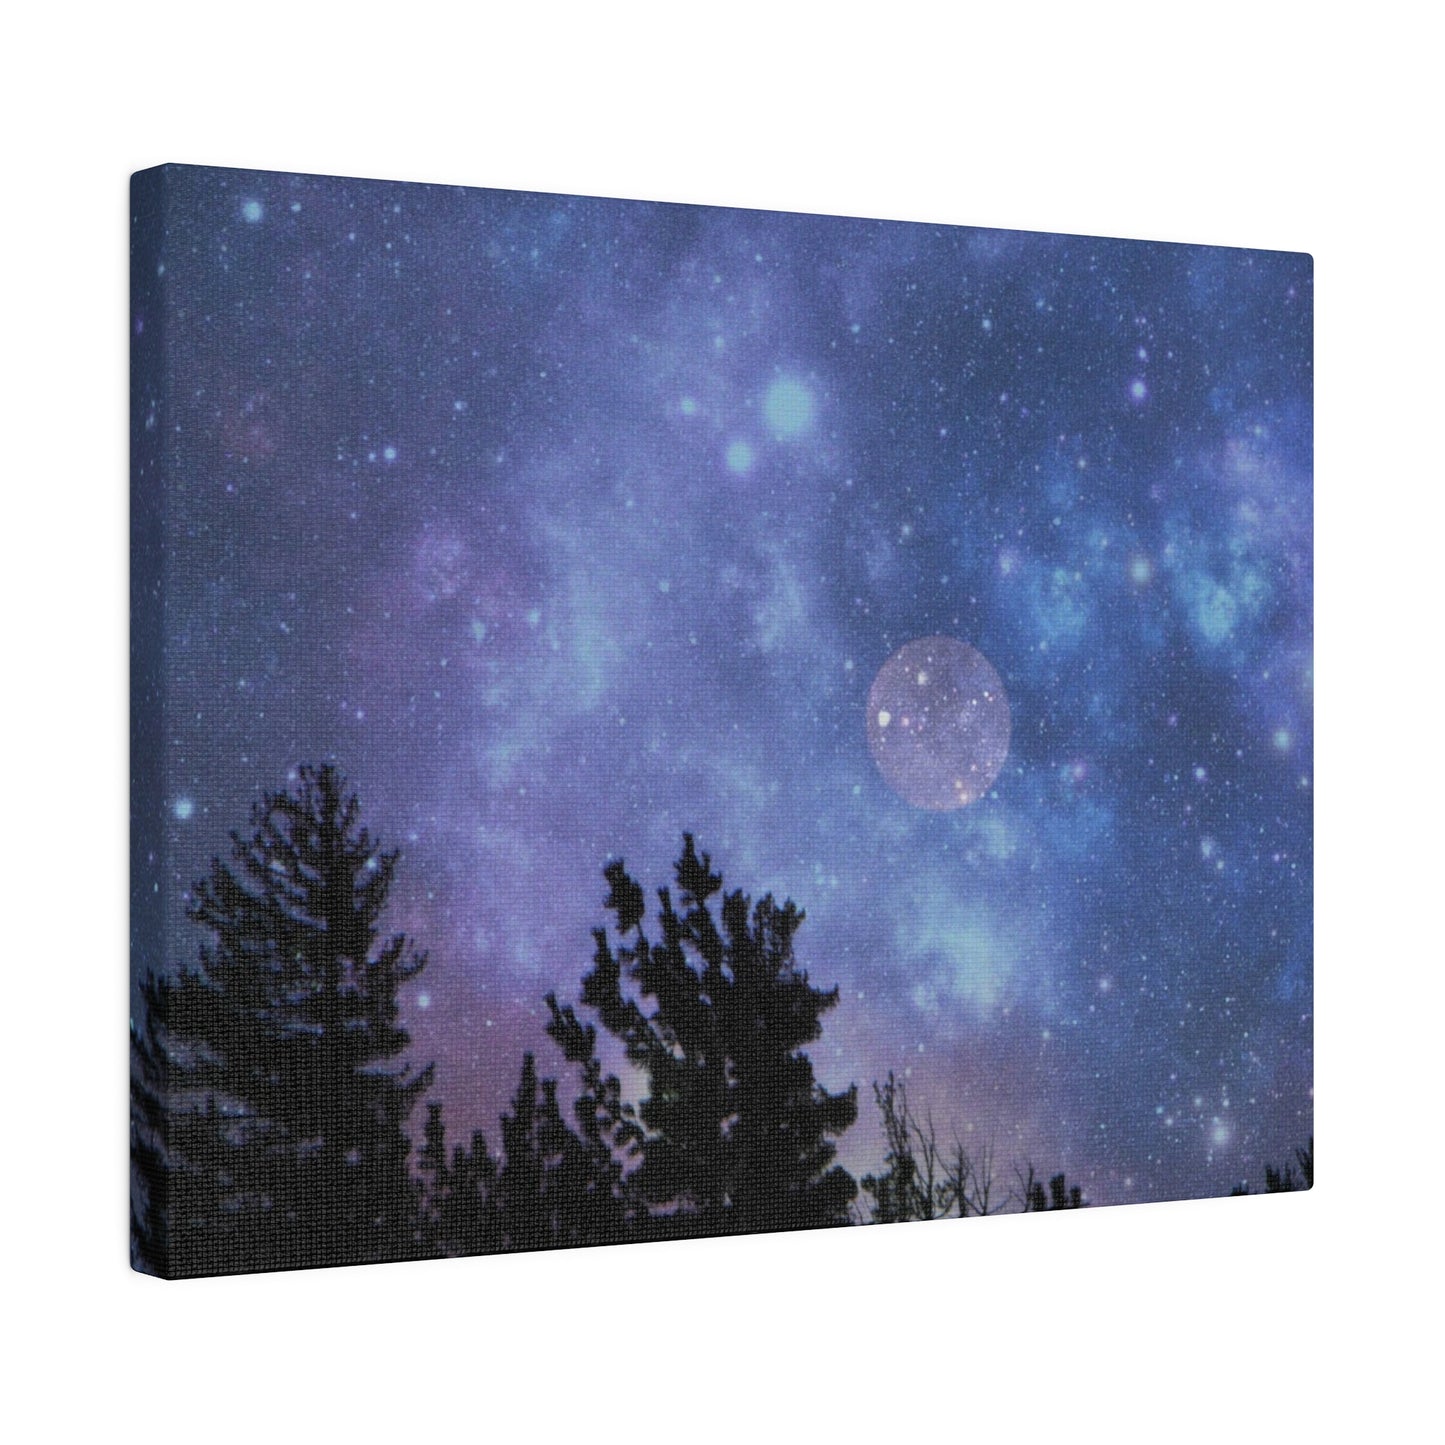 Printify's Blue-Moon Matte Canvas print of a night sky with stars, nebulae, and the moon behind silhouetted trees on a radial pine frame.